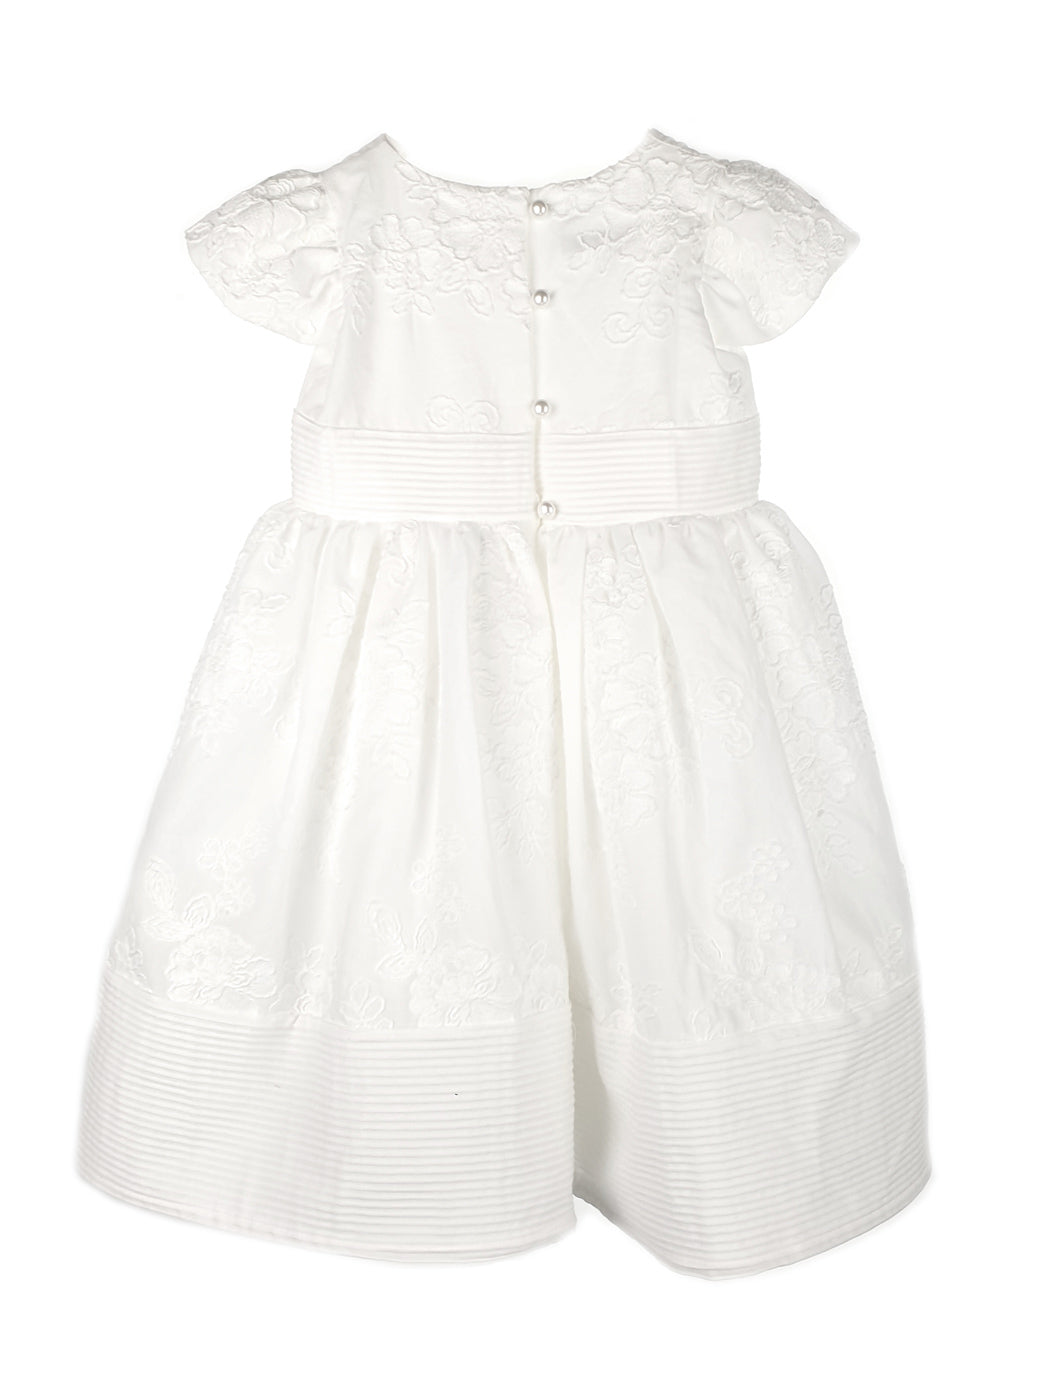 Girl's Εmbroidered dress - BRIO white